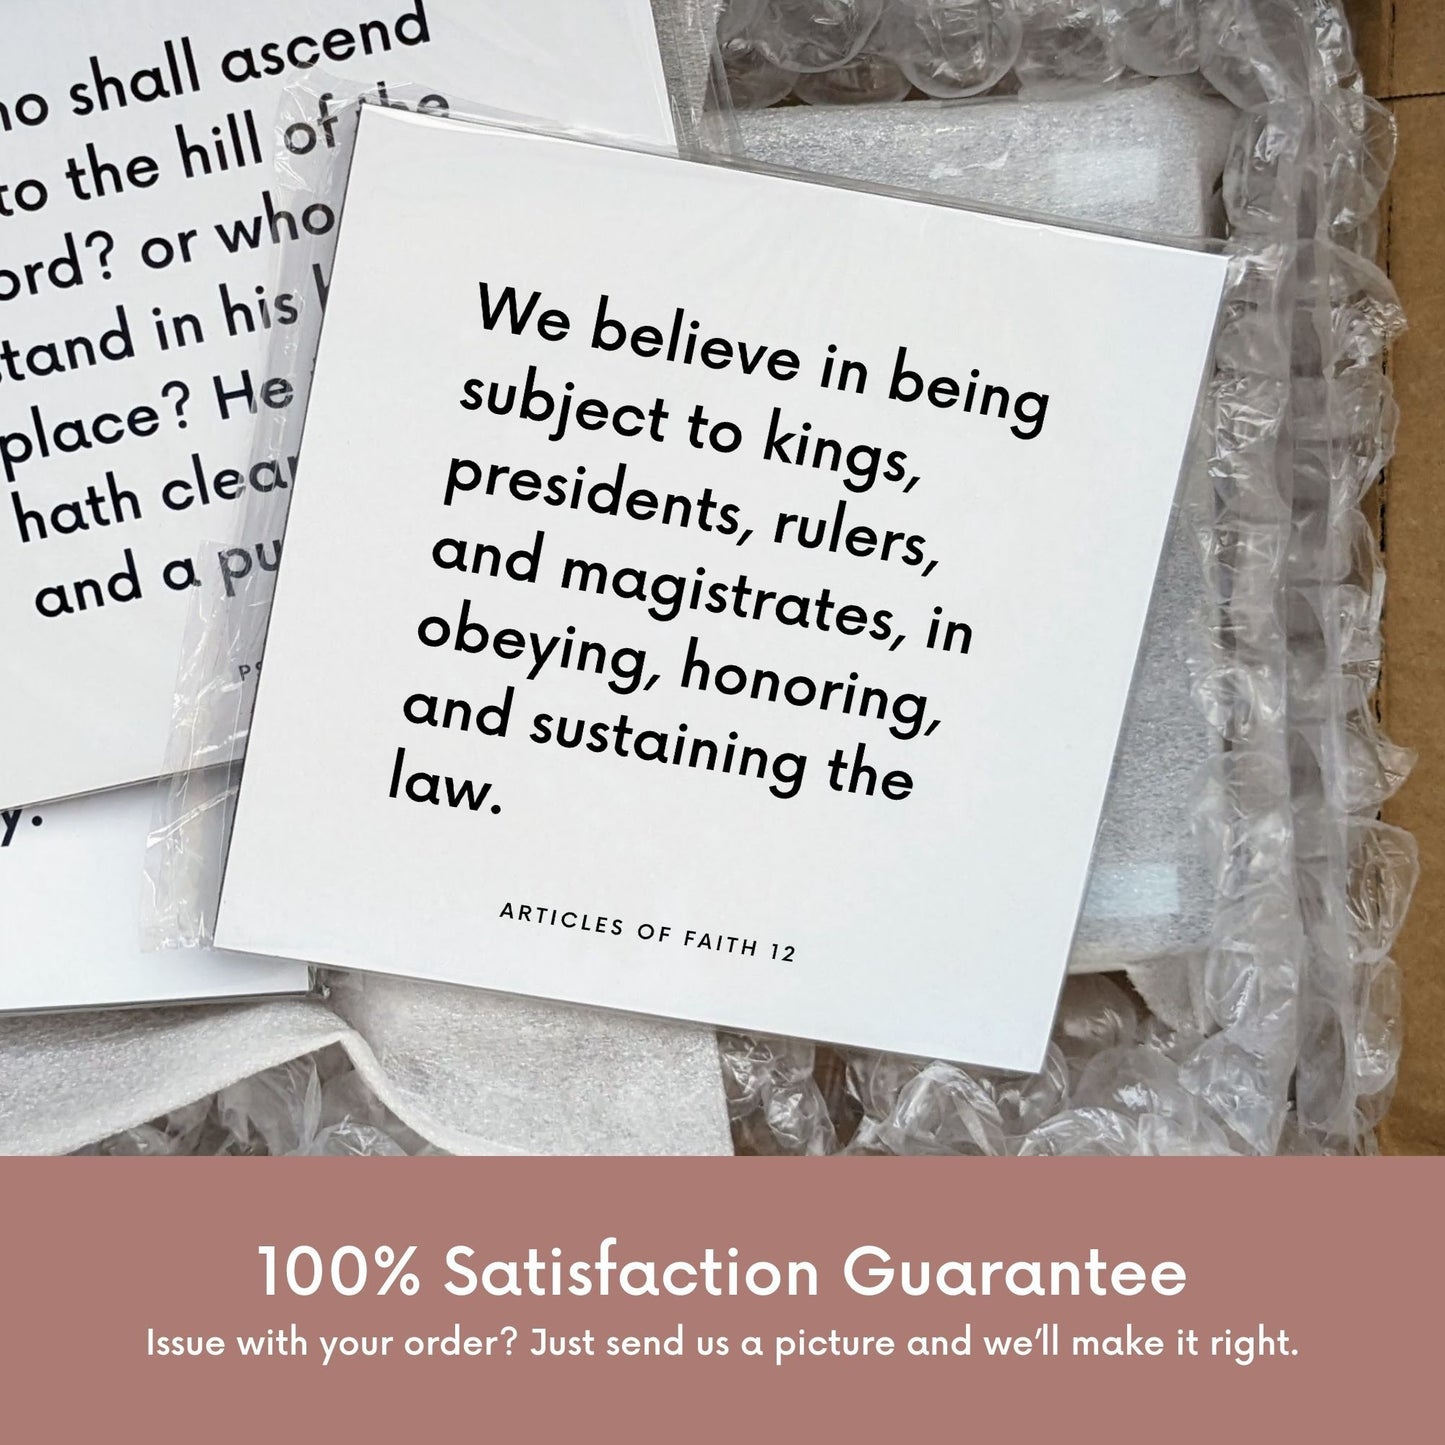 Shipping materials for scripture tile of Articles of Faith 12 - "We believe in being subject to kings, presidents, rulers"